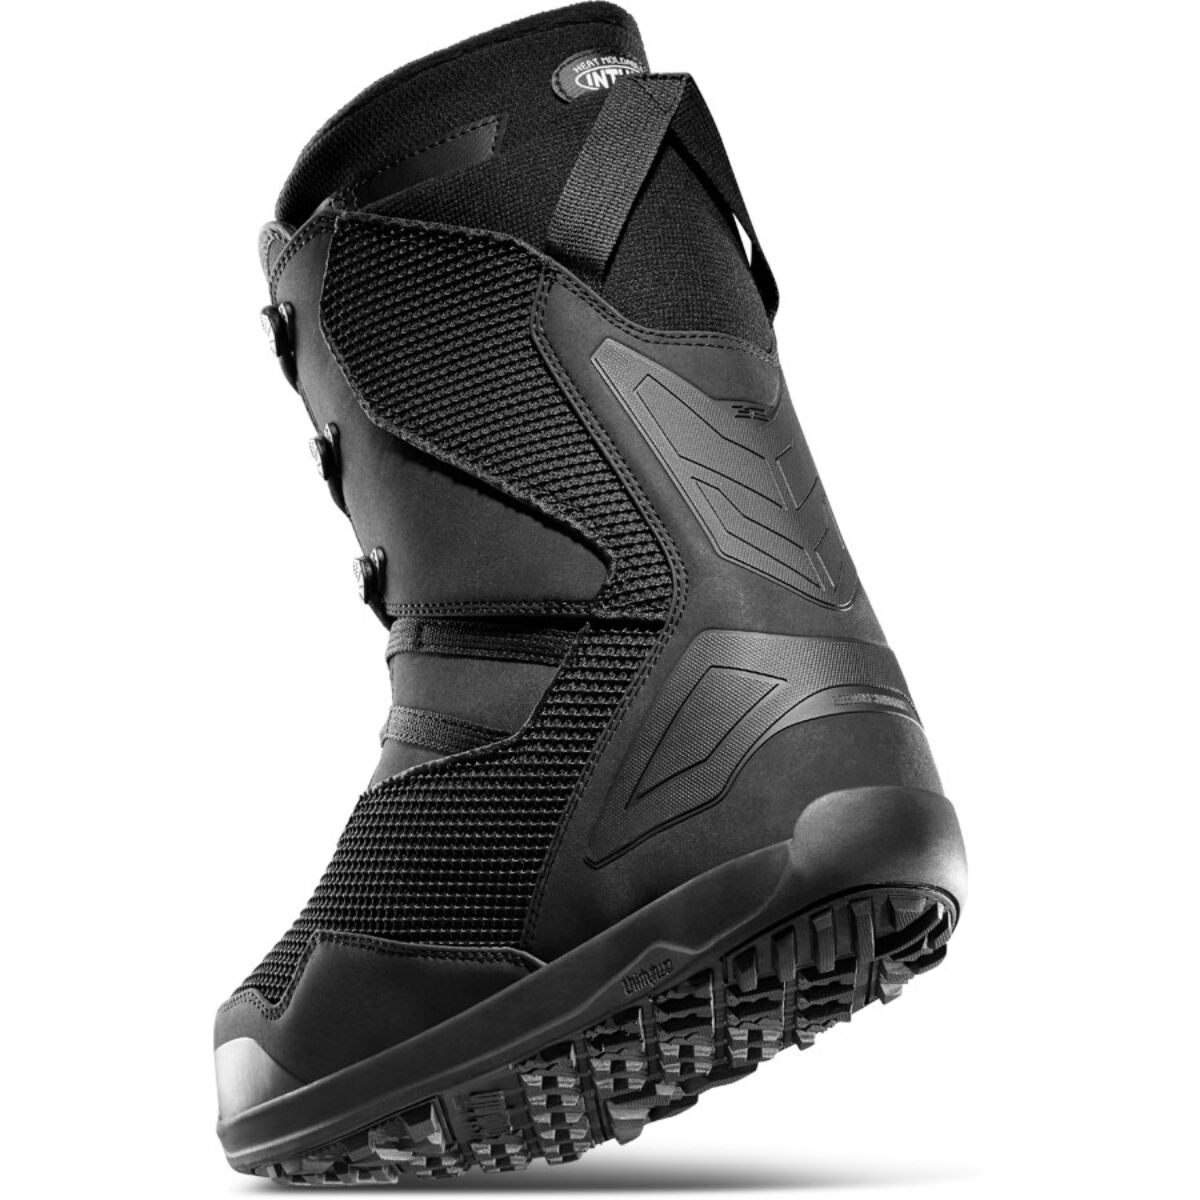 ThirtyTwo TM-2 Snowboard Boots Mens | Christy Sports